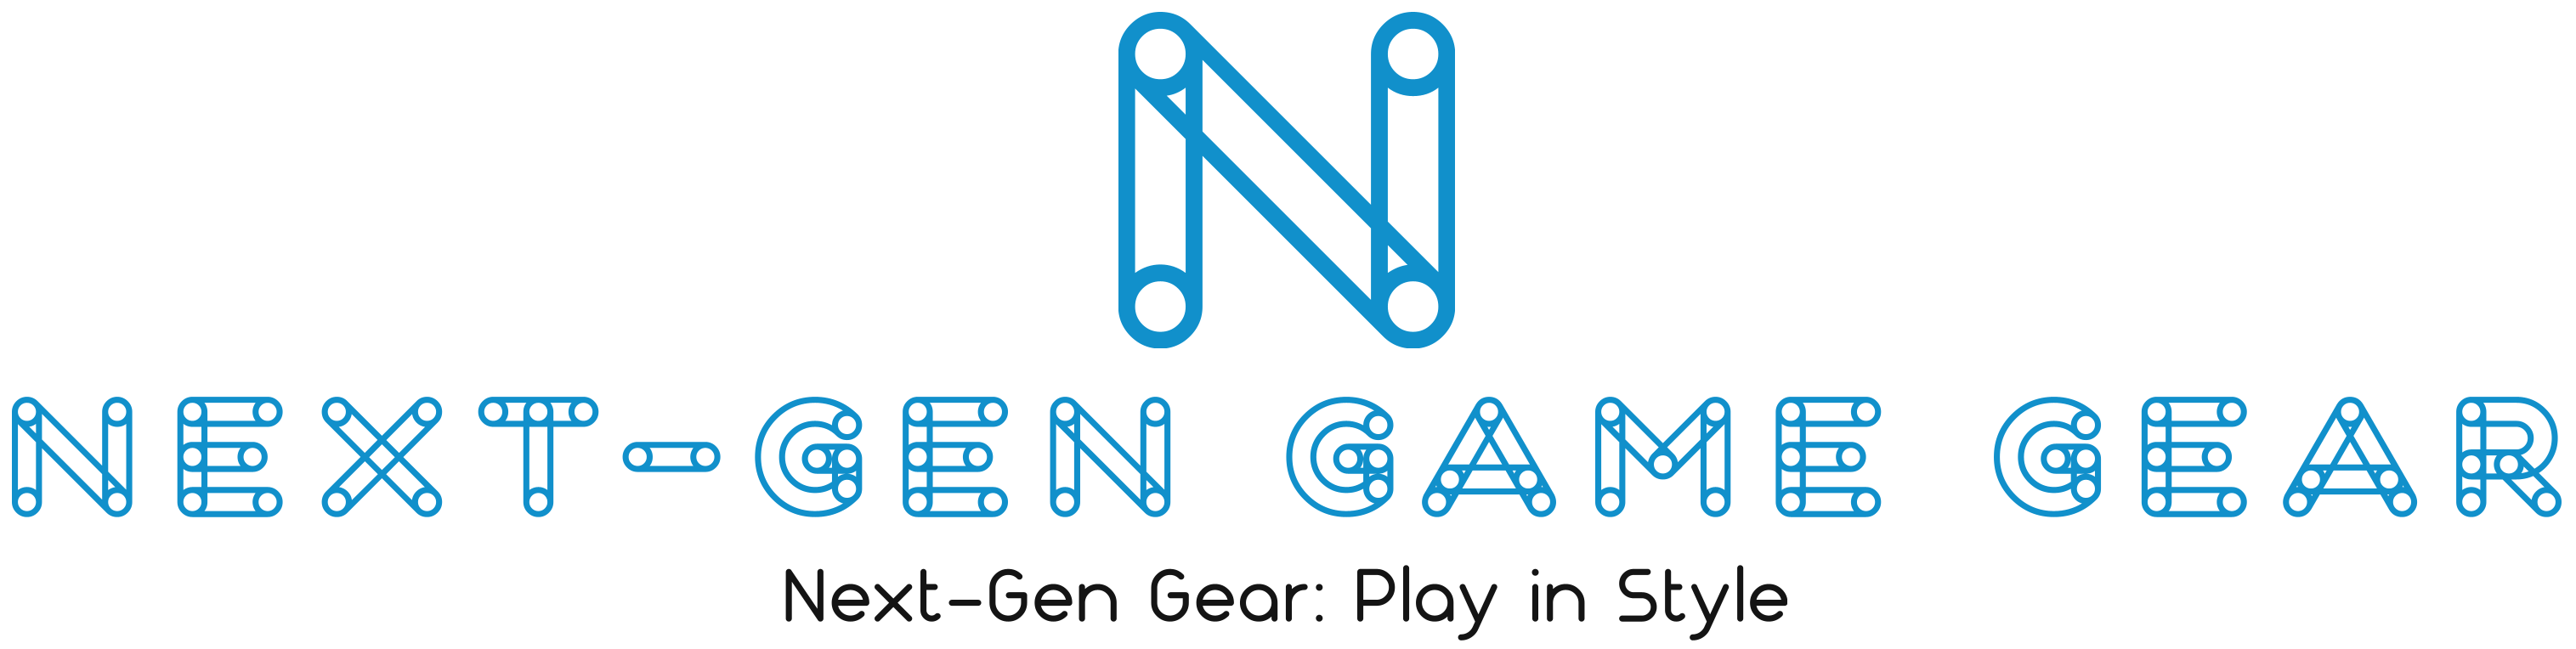 10% Off With Next-Gen Game Gear Discount Code